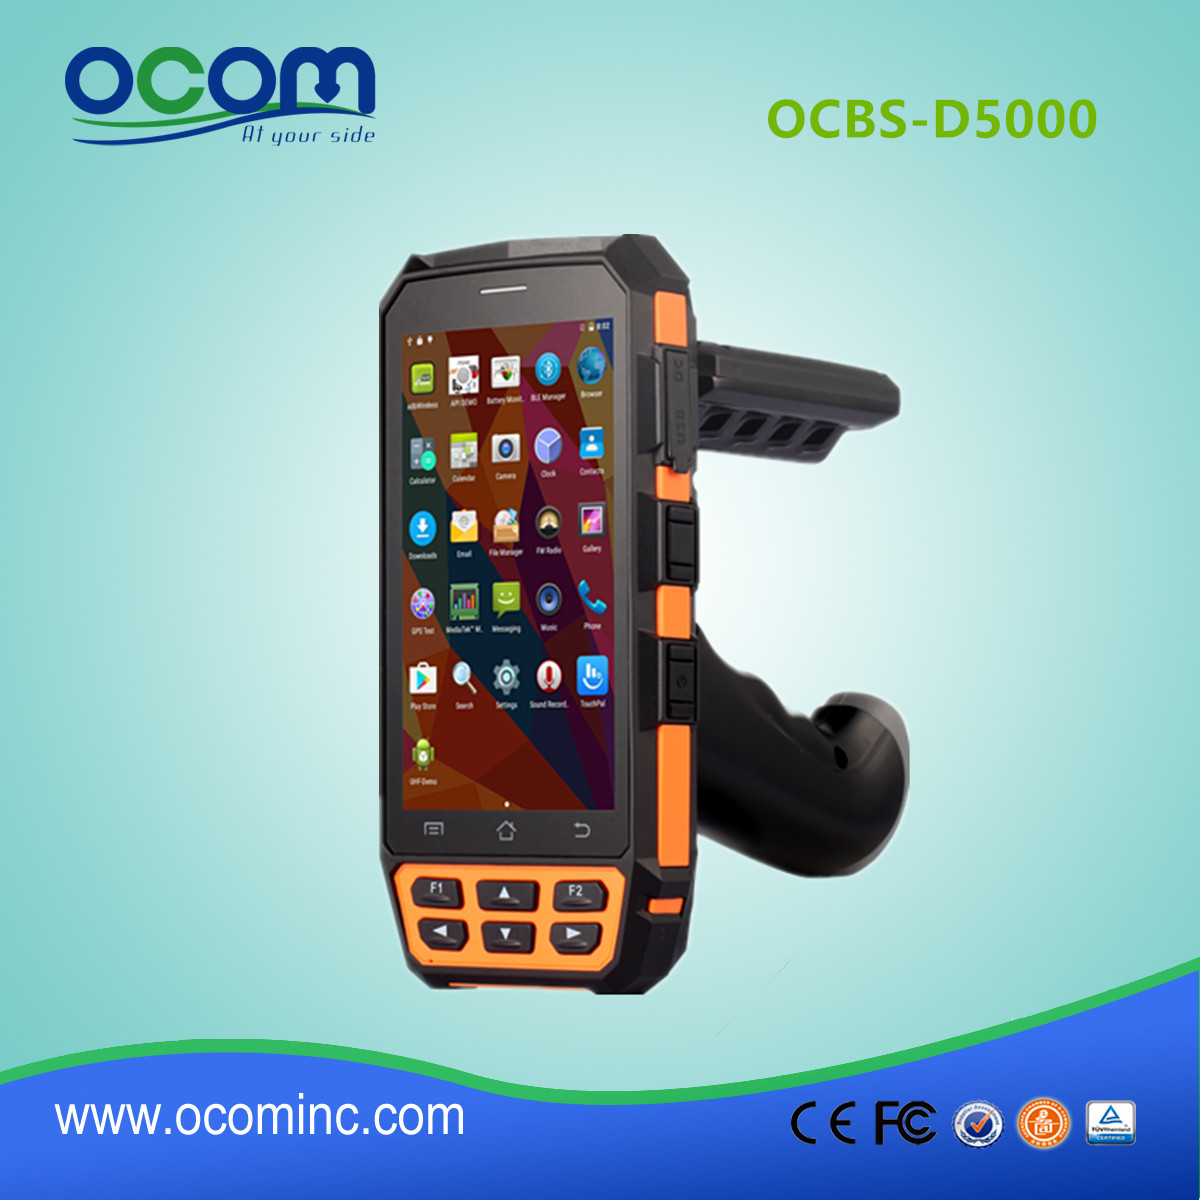 OCBS-D5000 portable handheld computer android data collection terminal handheld data transfer device